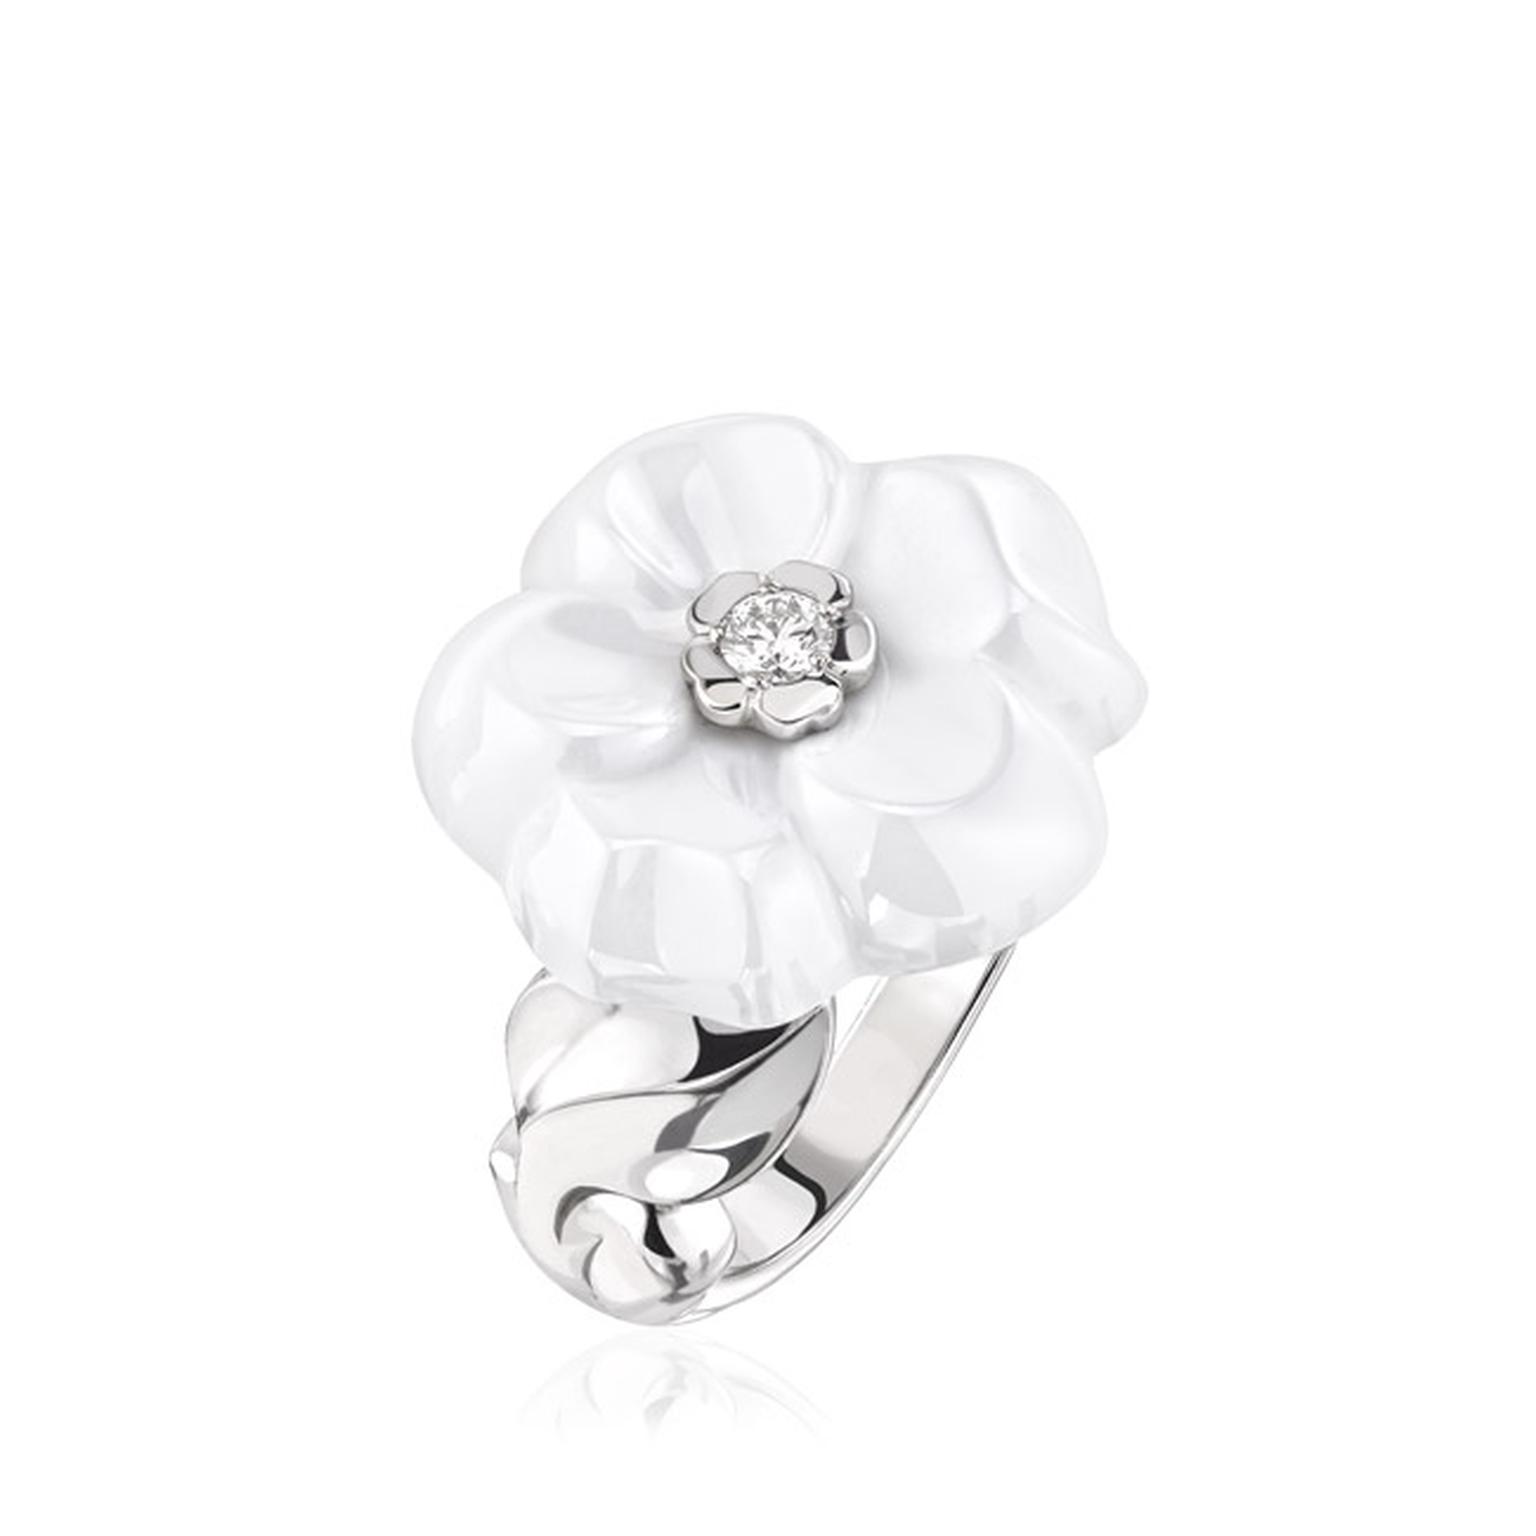 Chanel Camélia Galbé small white ceramic ring with a brilliant-cut white diamond at its heart, set on a twisted white gold band (£2,850).